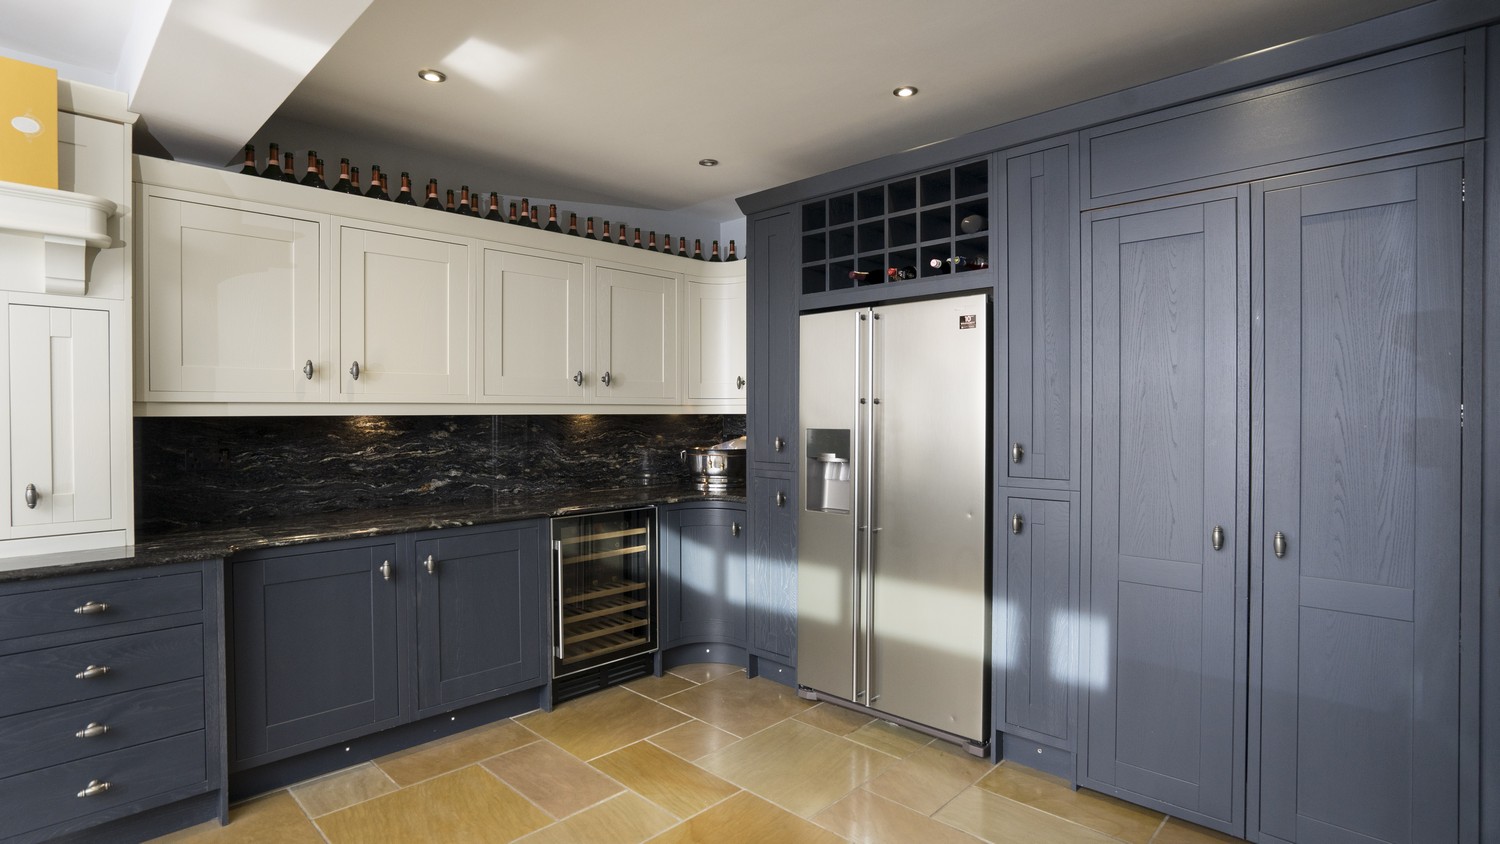 Timber inframe kitchen showing fridge/freezer and tall larder style cupboards. All units have been finished with a painted finish in midnight blue and Ivory.